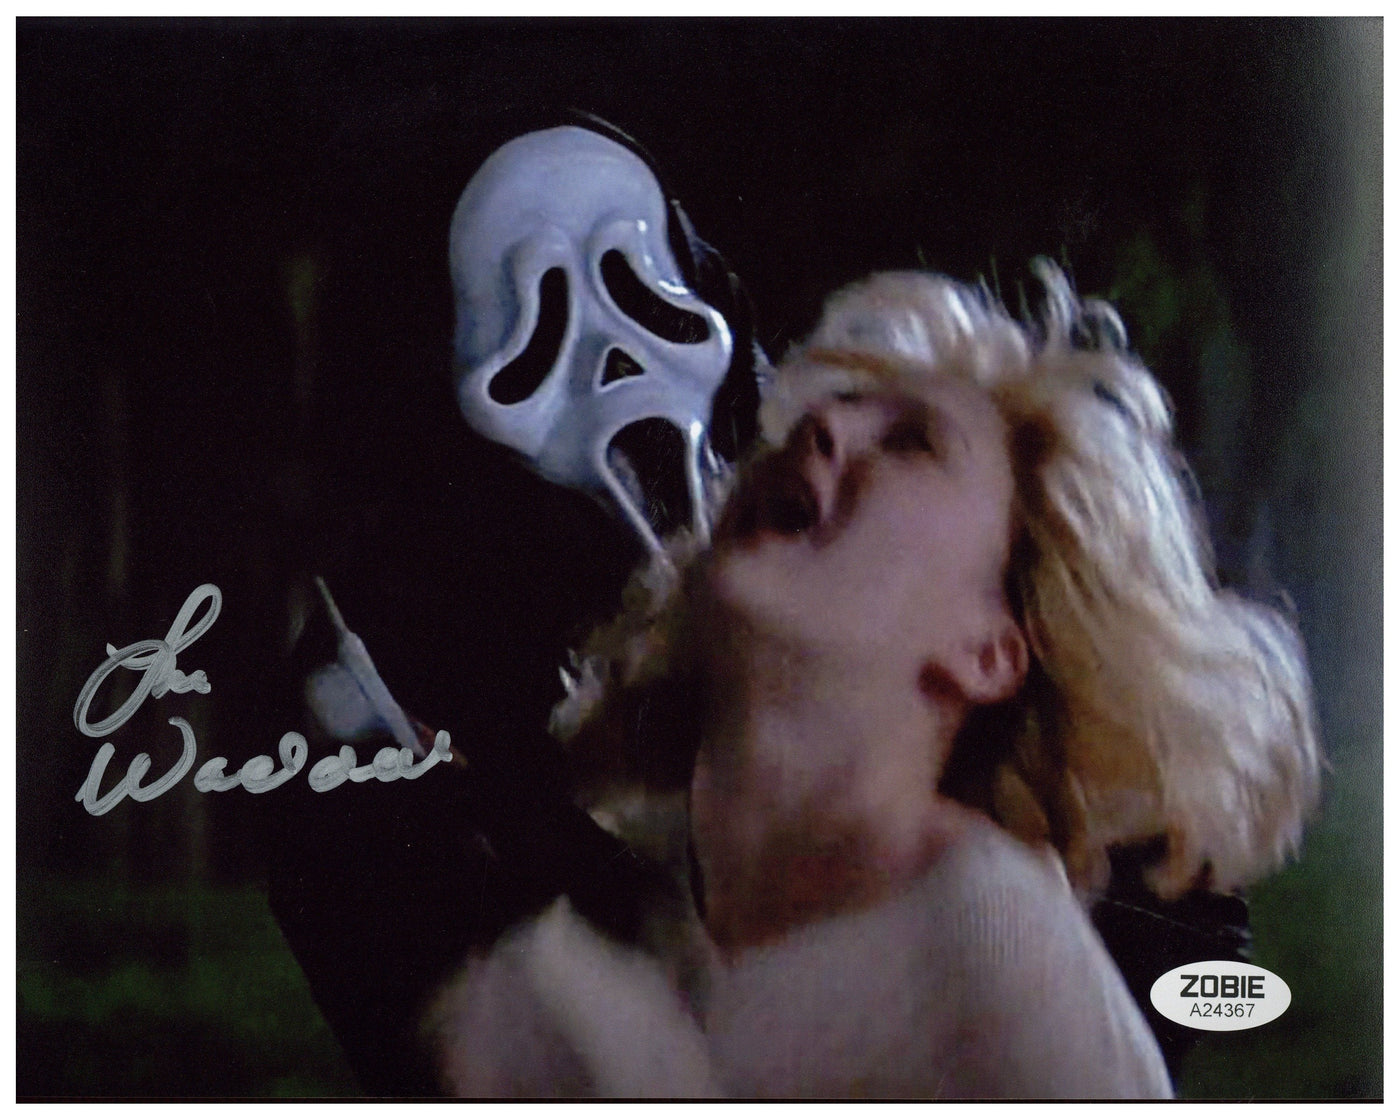 Lee Waddell Signed 8x10 Photo Scream Ghostface Autographed Zobie COA #3